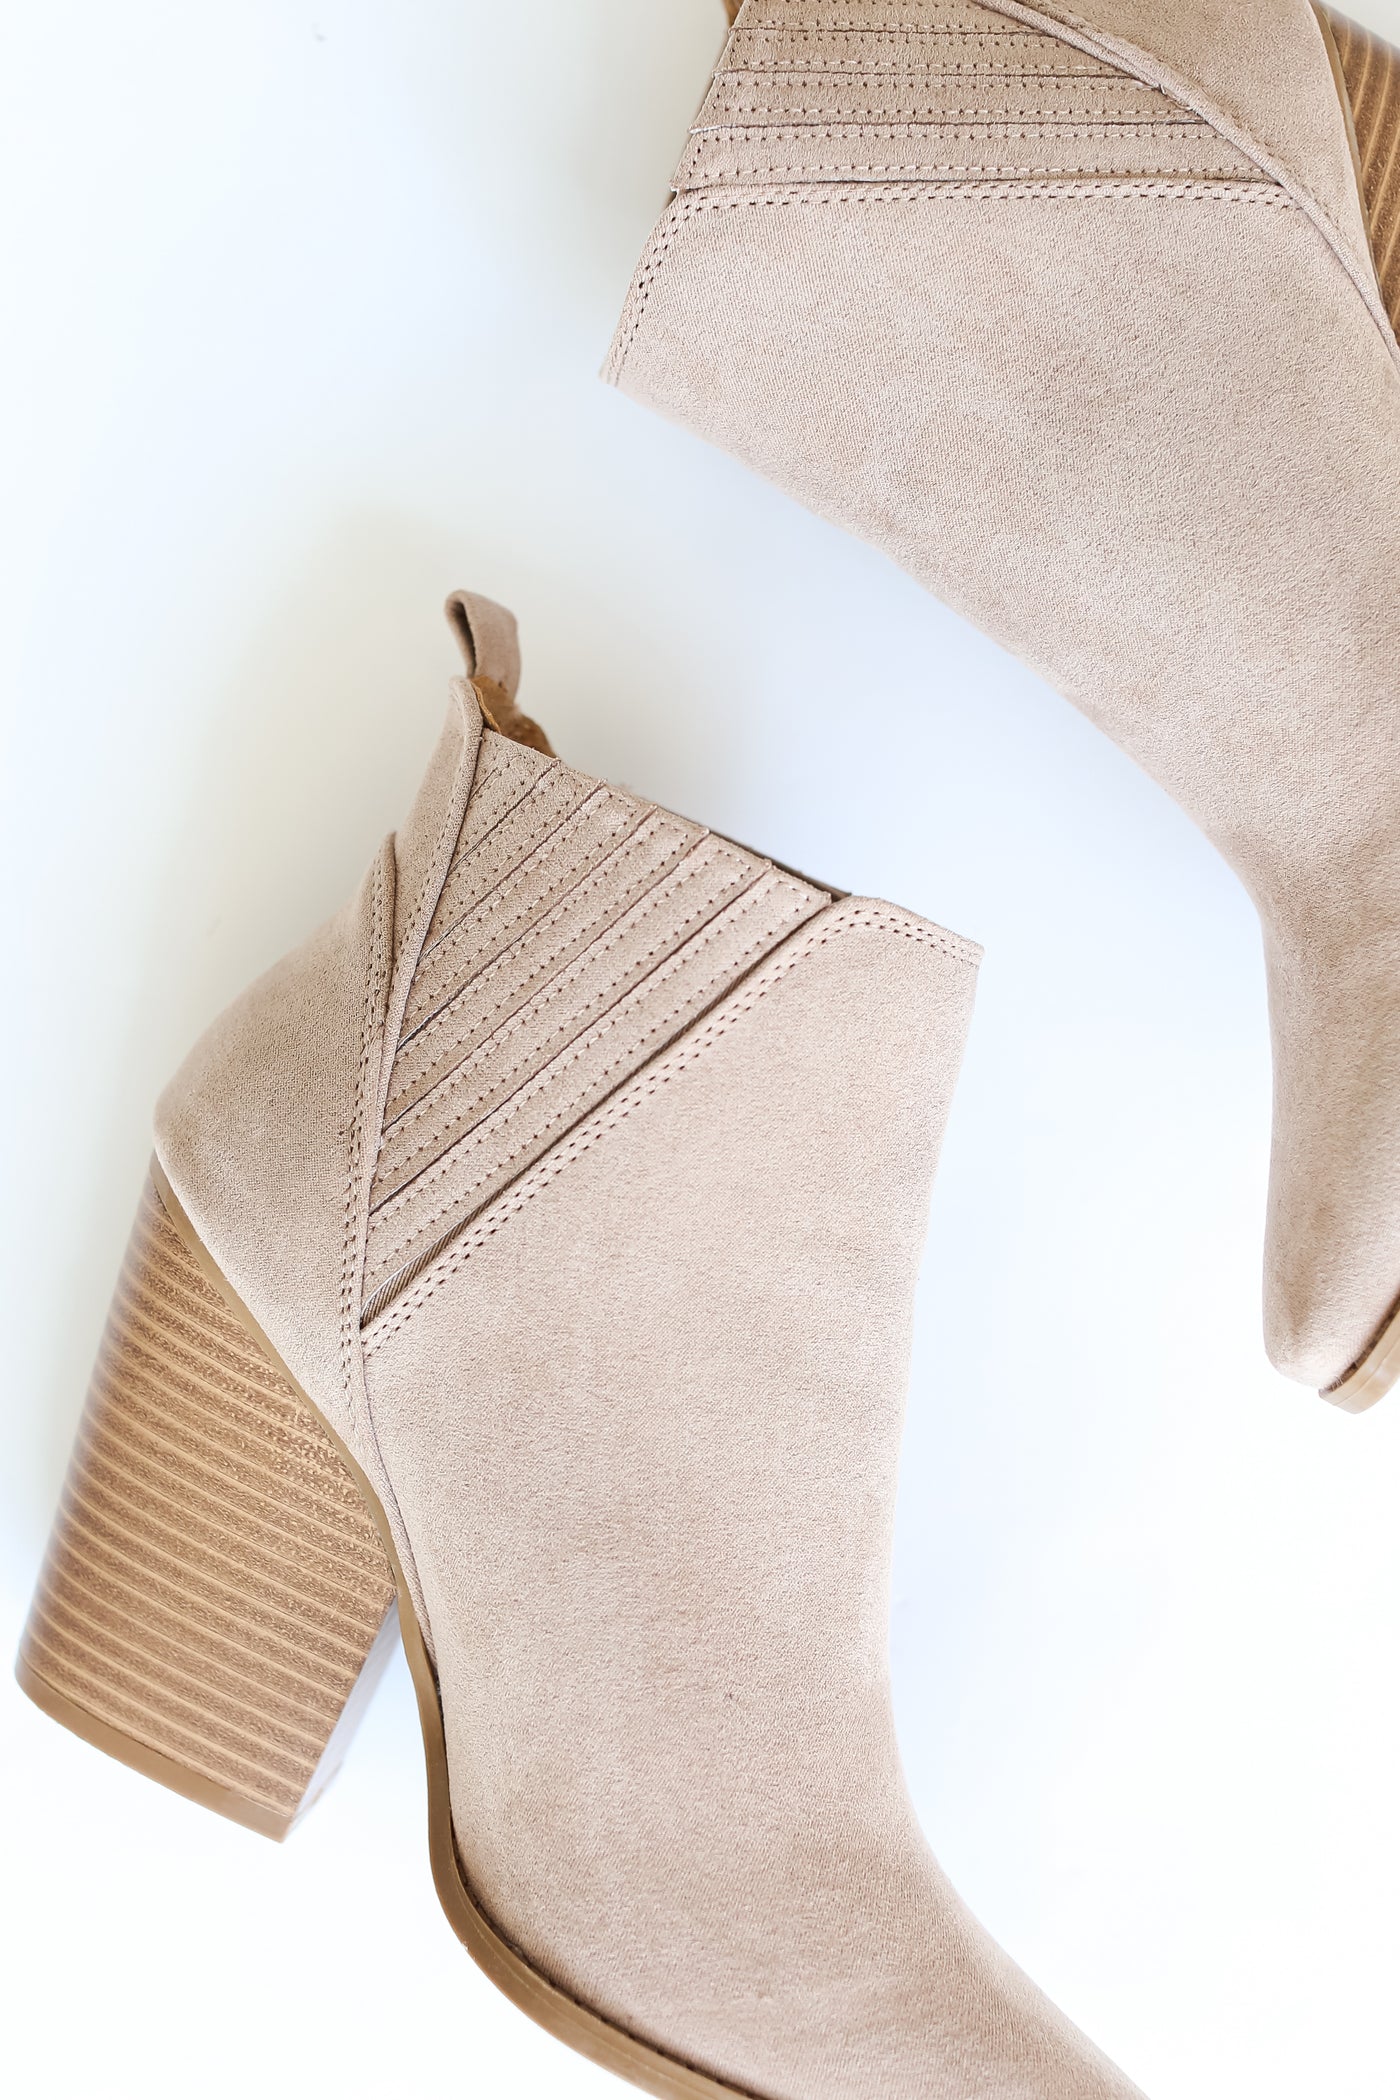 taupe suede Booties close up flat lay